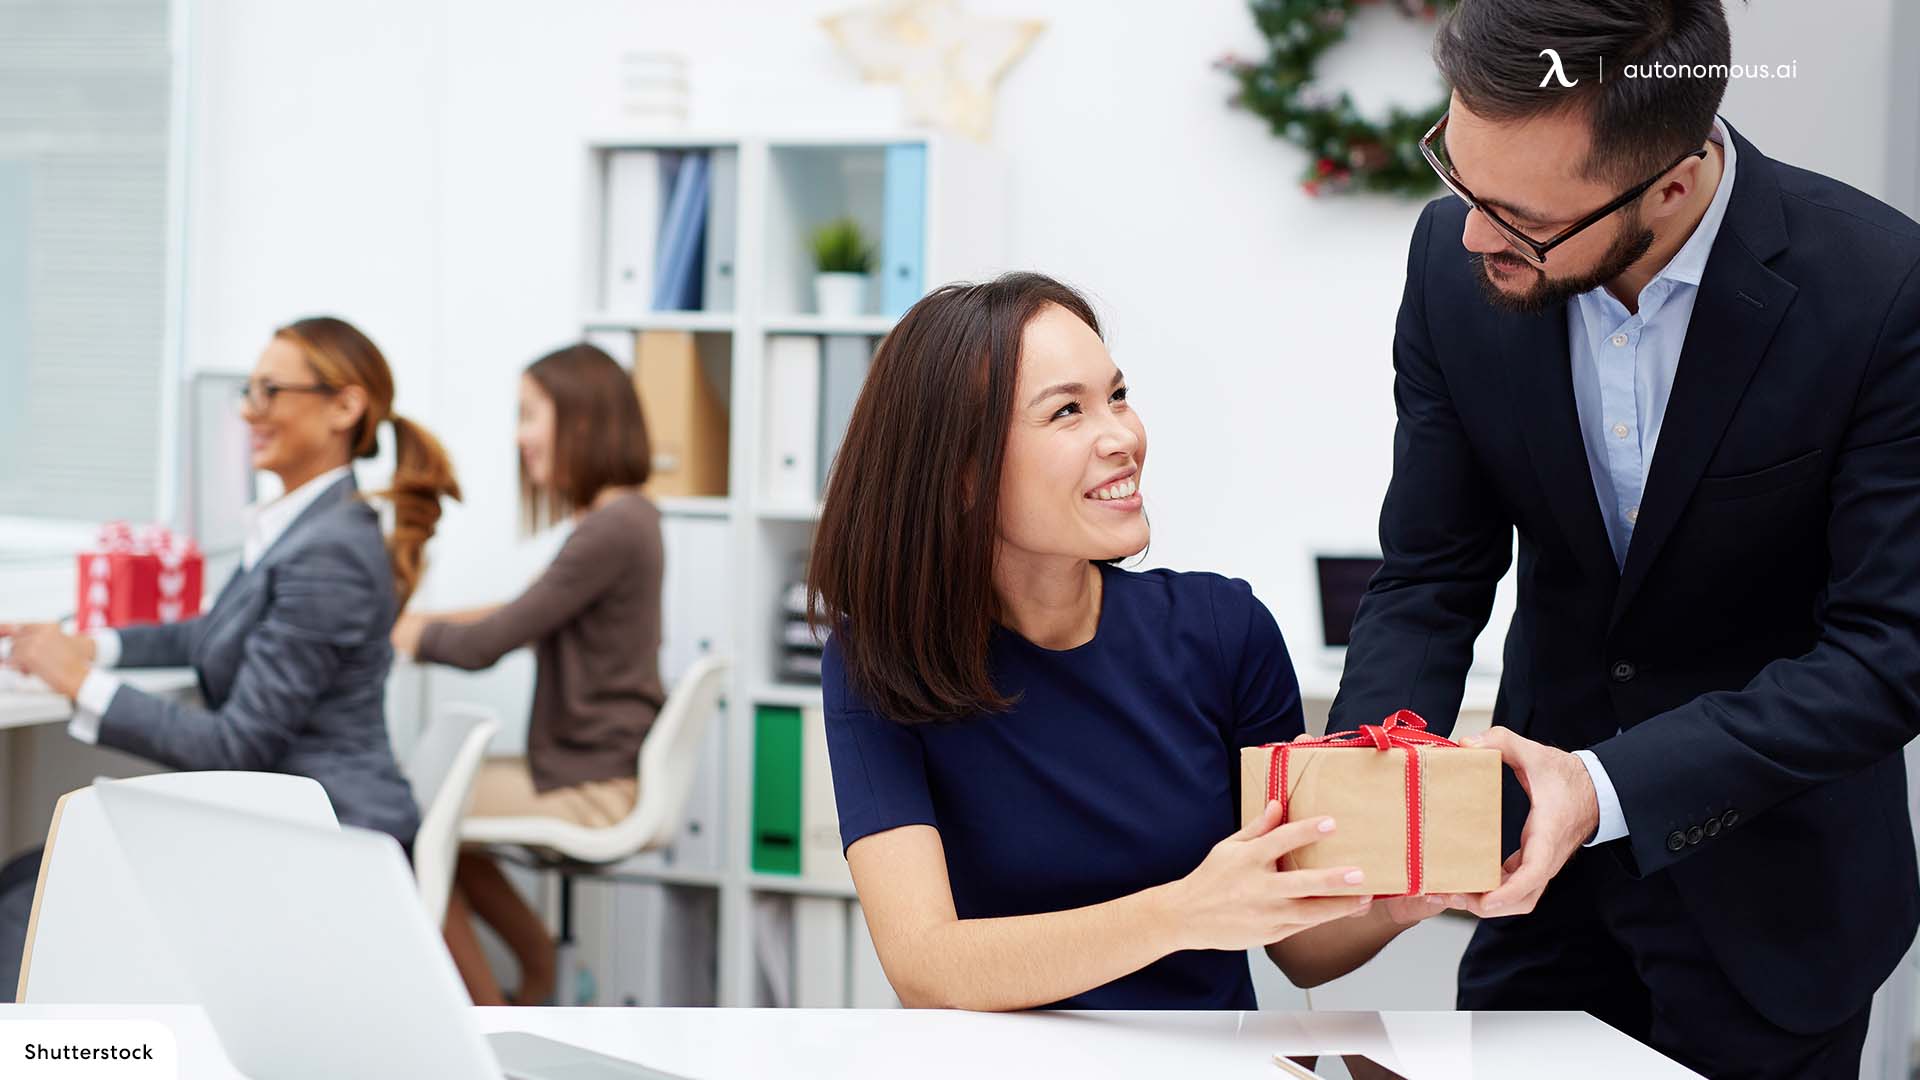 Best Bulk Office Gifts for Your Staff That Can Boost Morale